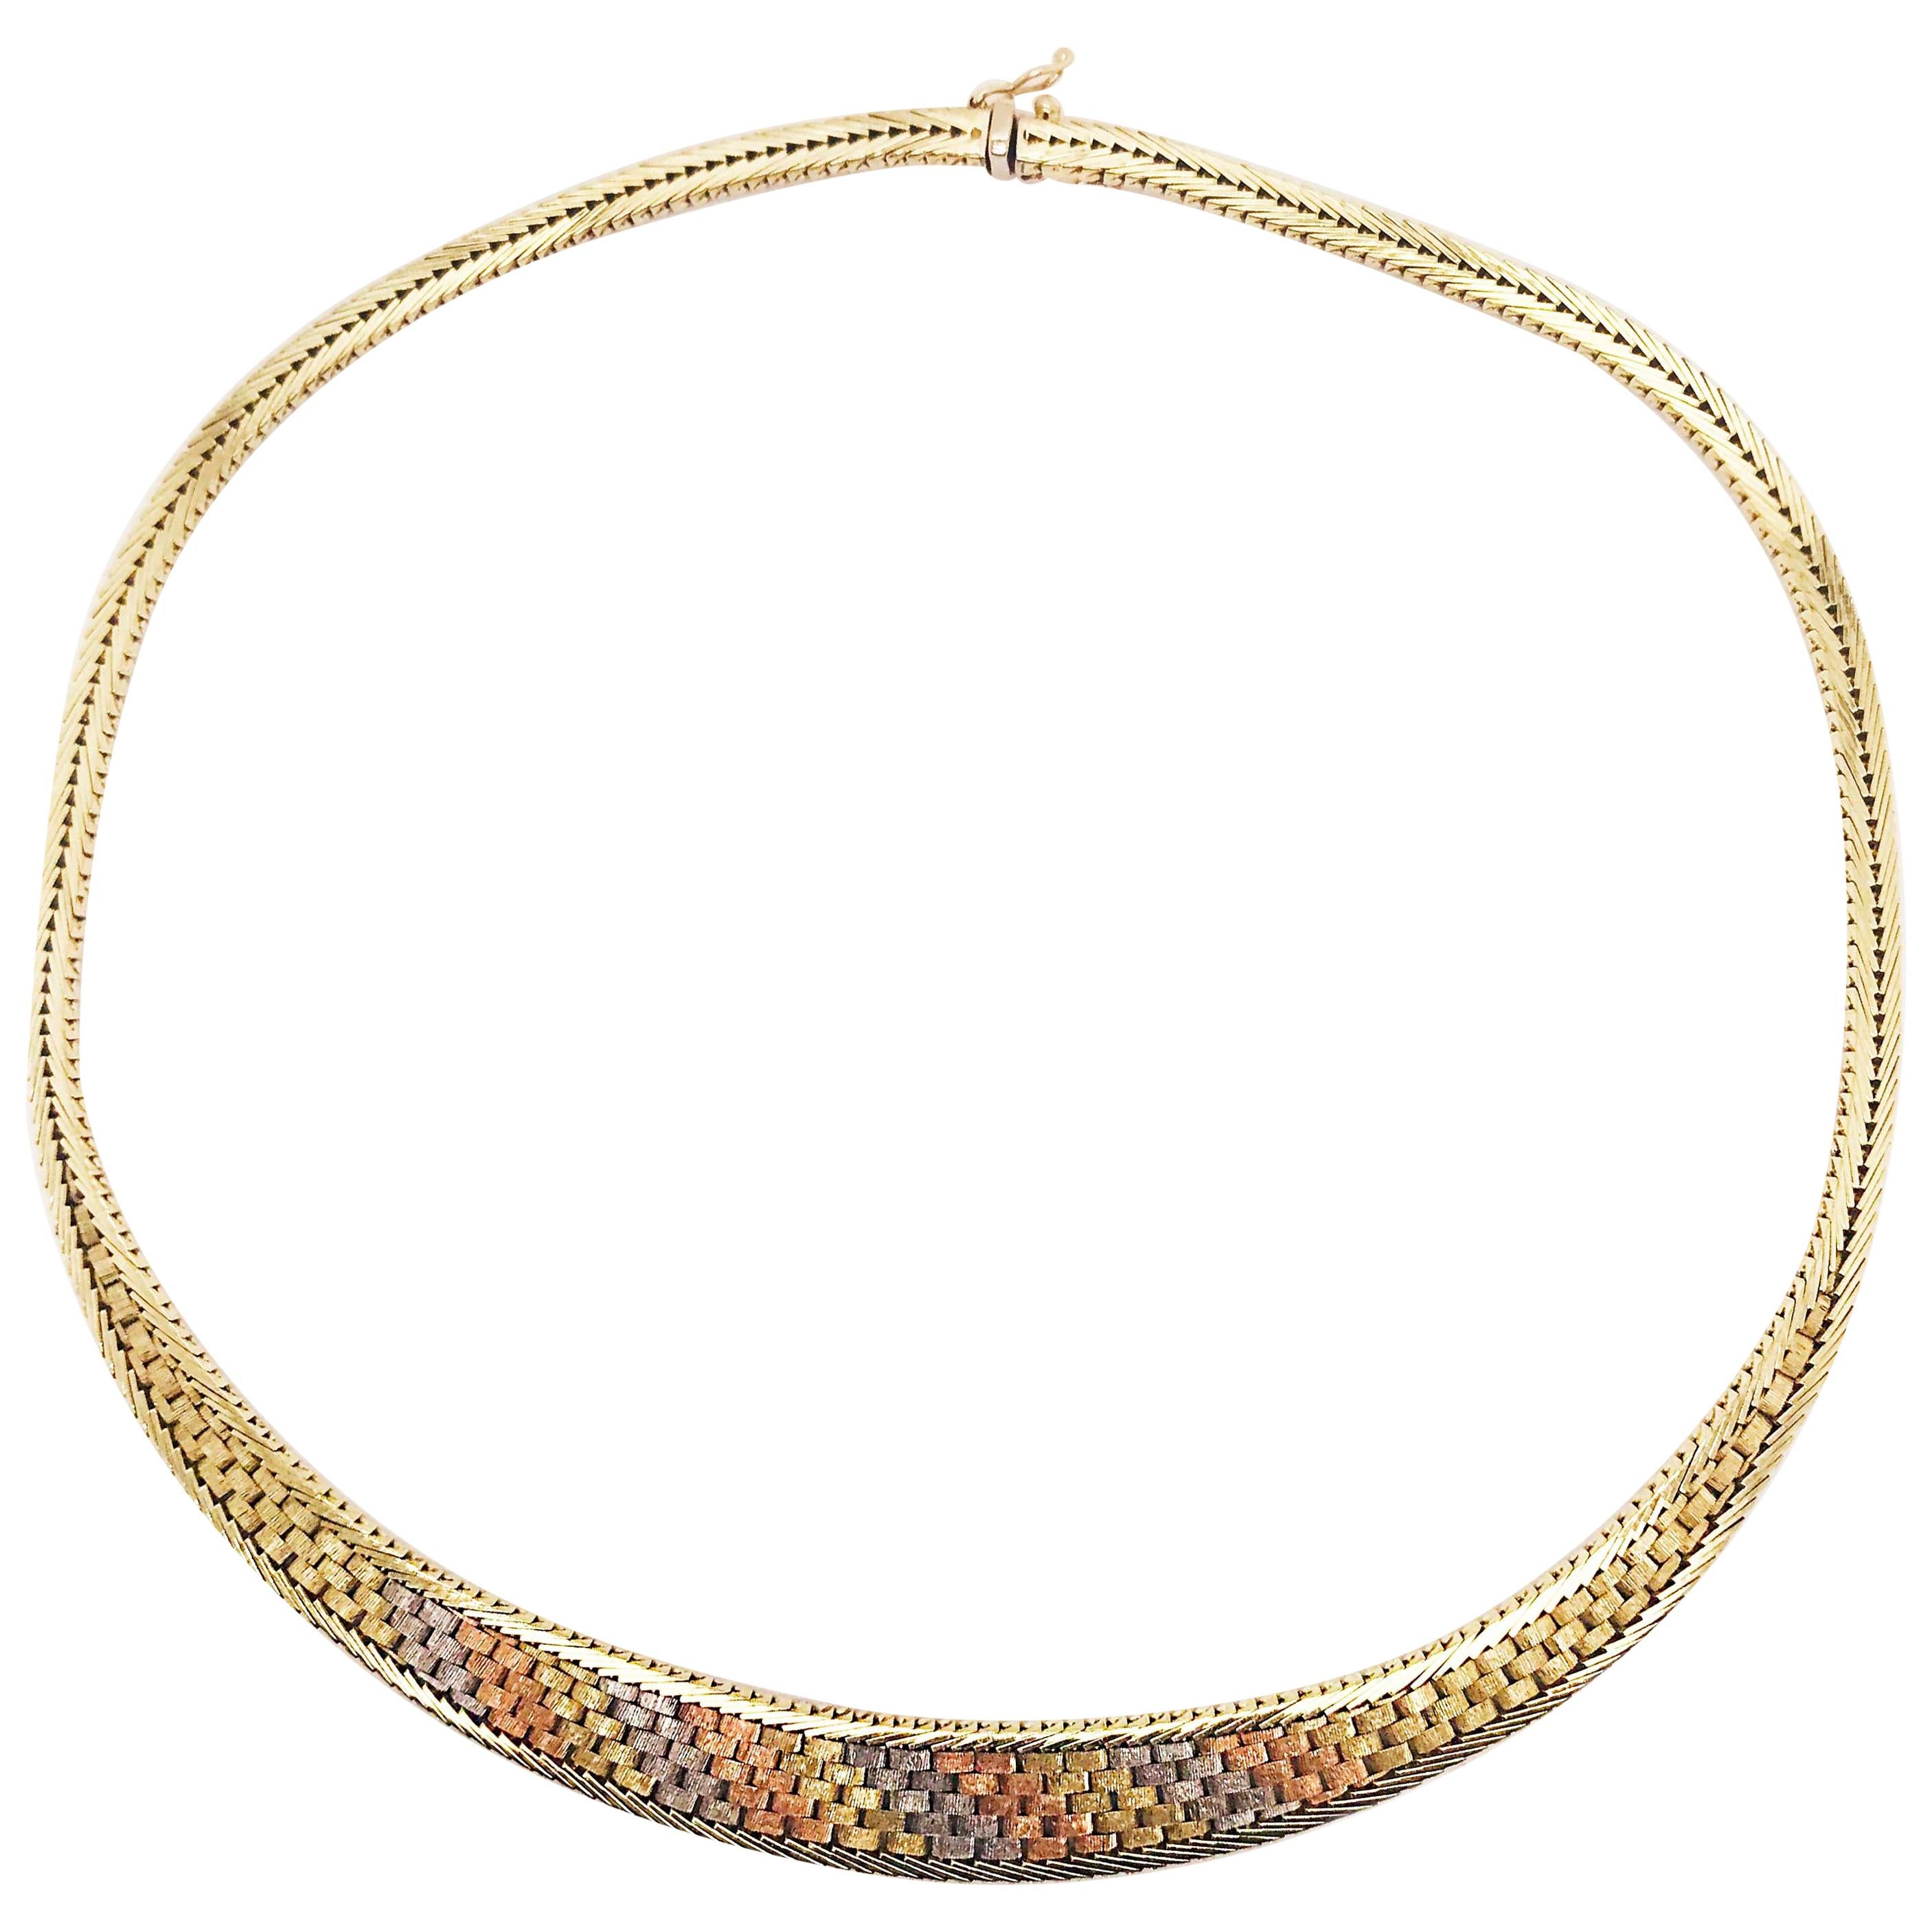 Mixed Metal Necklace, Gold Link Chain Choker, 14K Yellow, White, Rose Gold